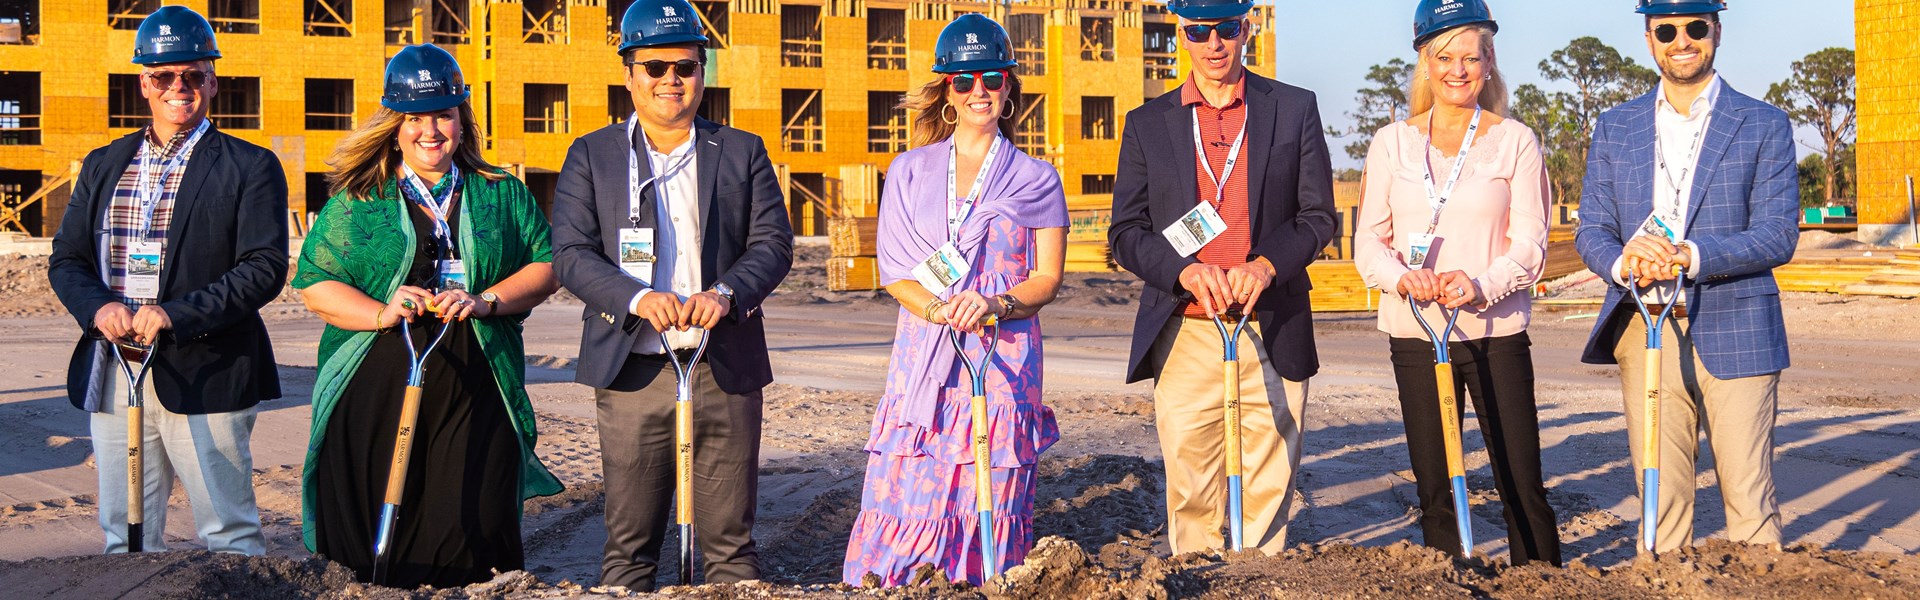 Crescent Communities Commemorated Groundbreaking for Multifamily  and Build-To-Rent Communities in South Sarasota